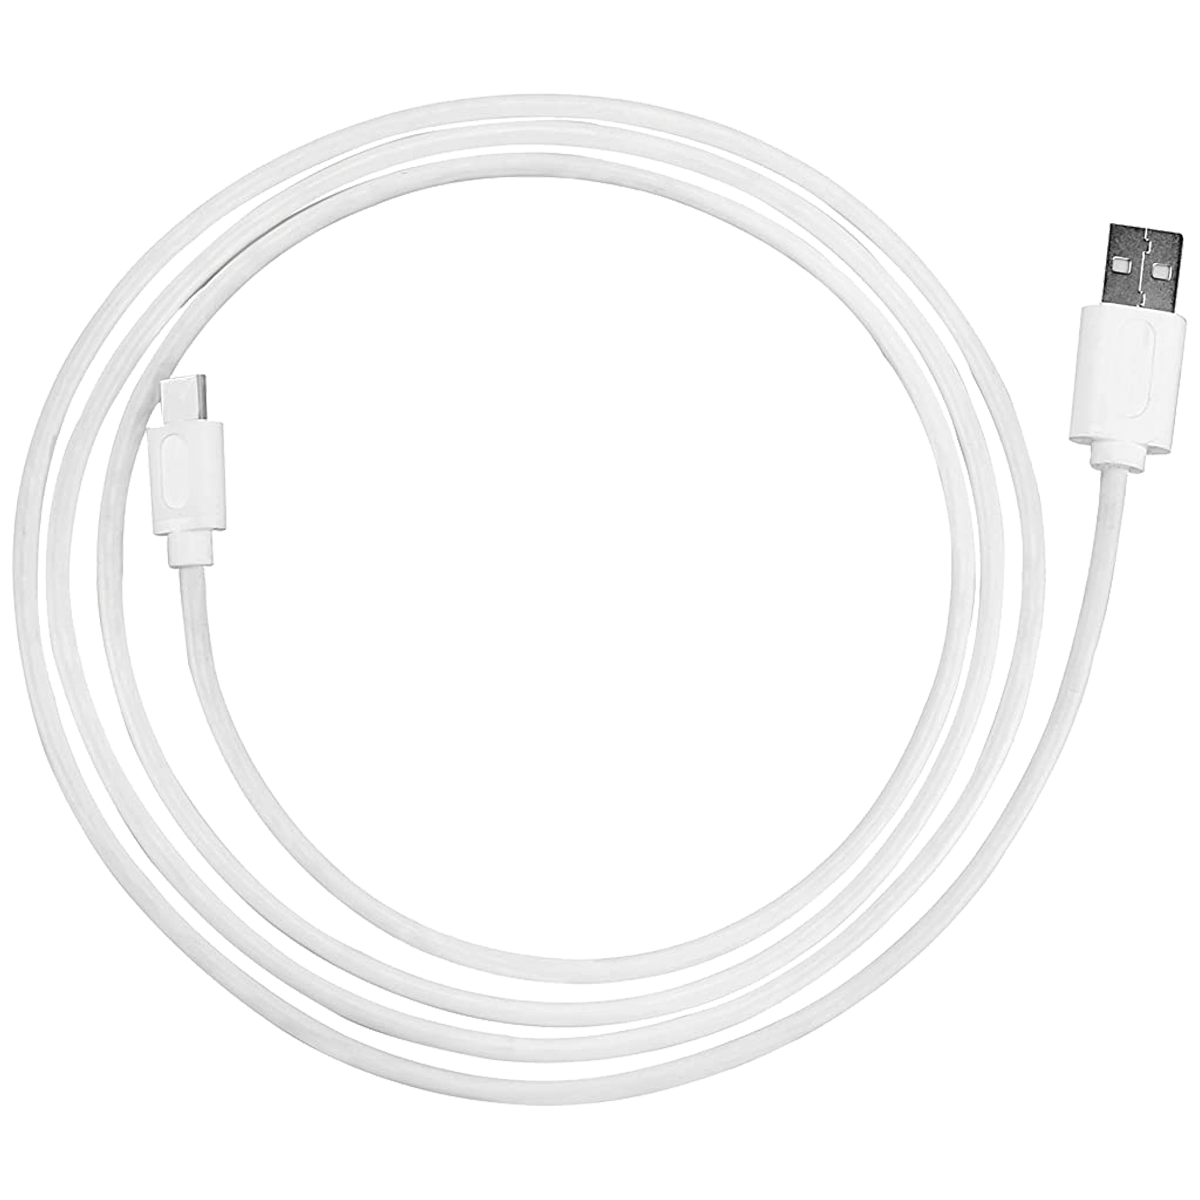 Nextech PVC 1 Meter USB 3.0 (Type-C) to USB 3.0 (Type-C) Power/Charging USB Cable (Fast Charging Compatible, NC66, White)_1